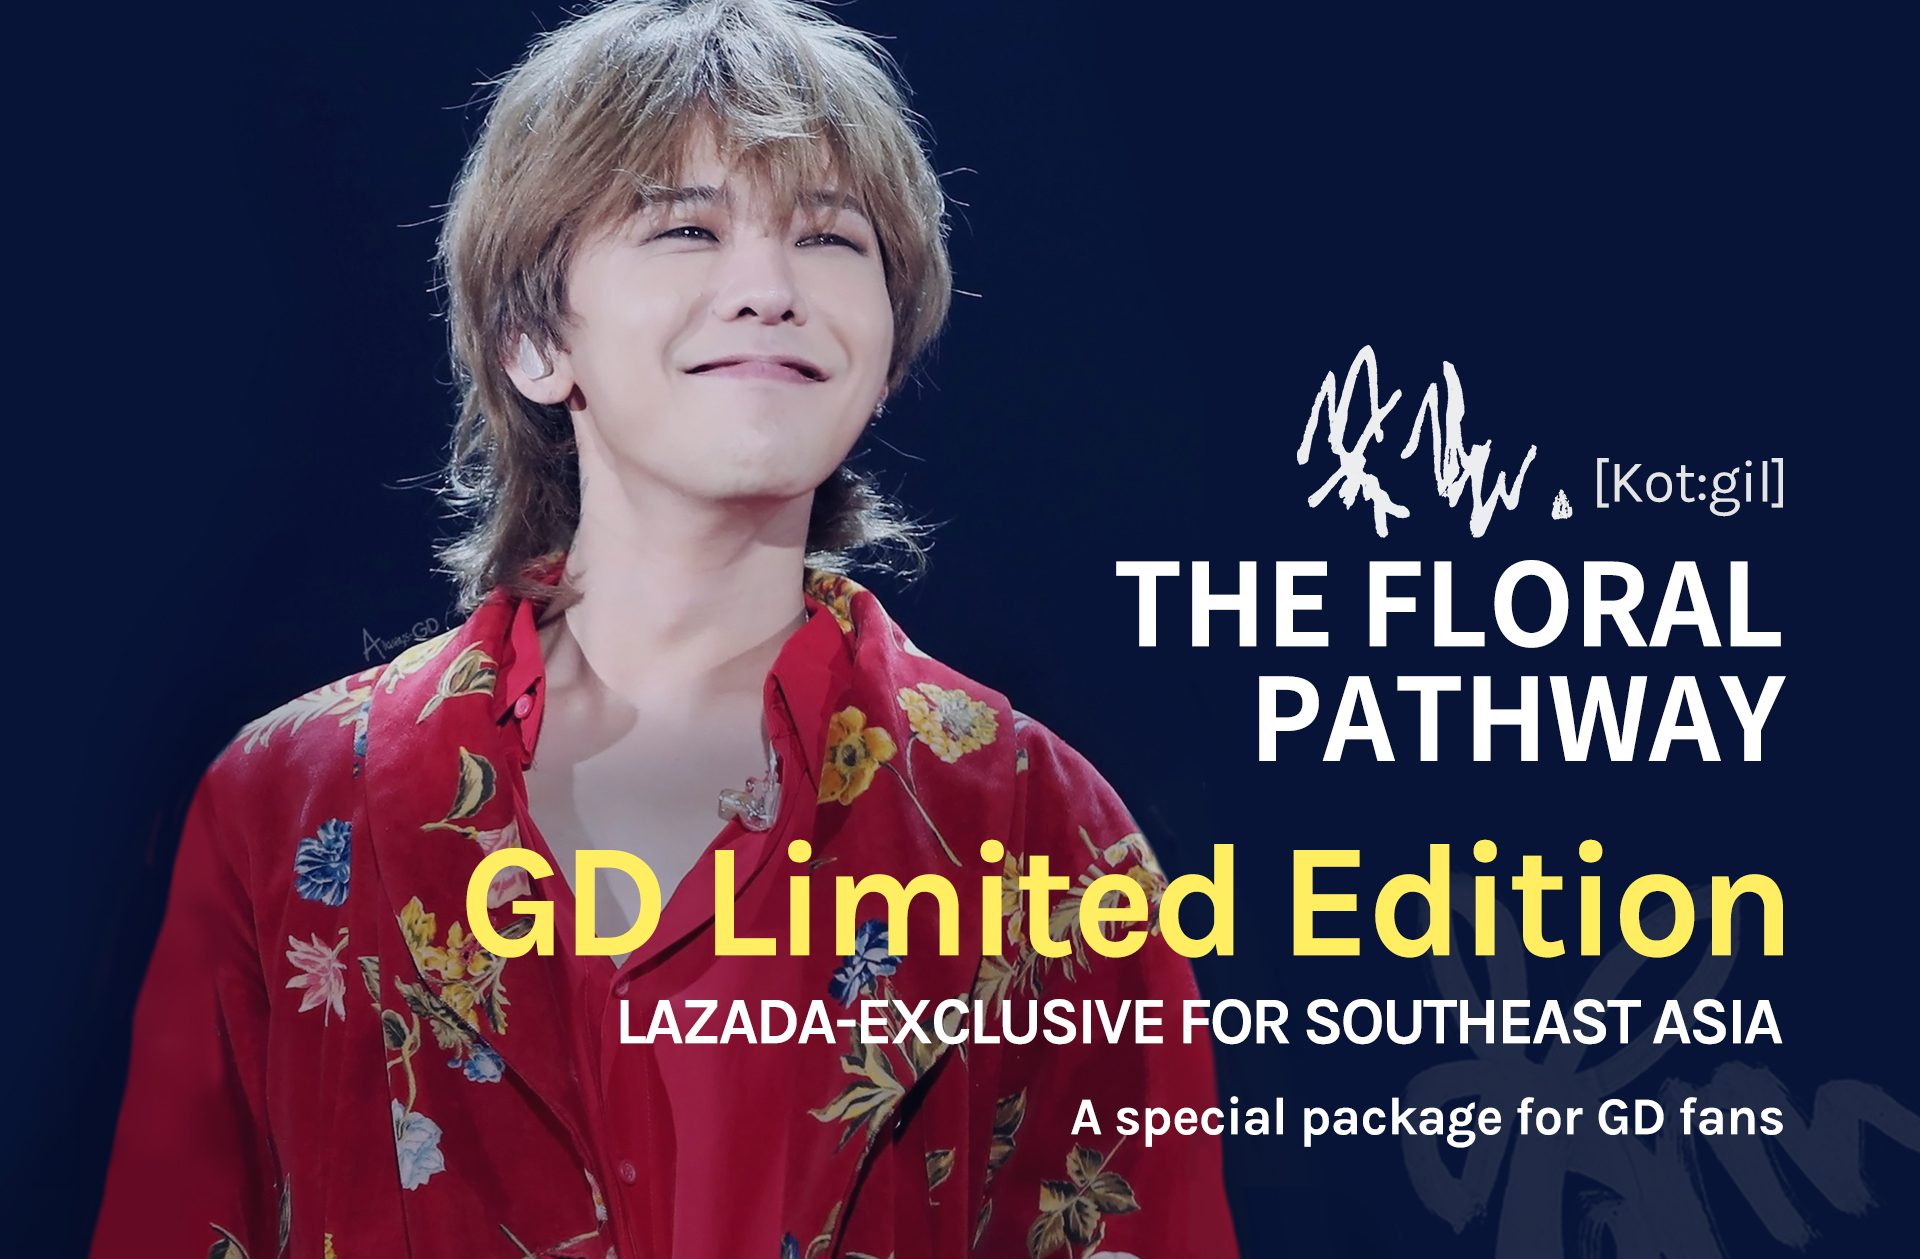 LOOK: Big Bang’s G-Dragon bids farewell to fans with gift set on Lazada